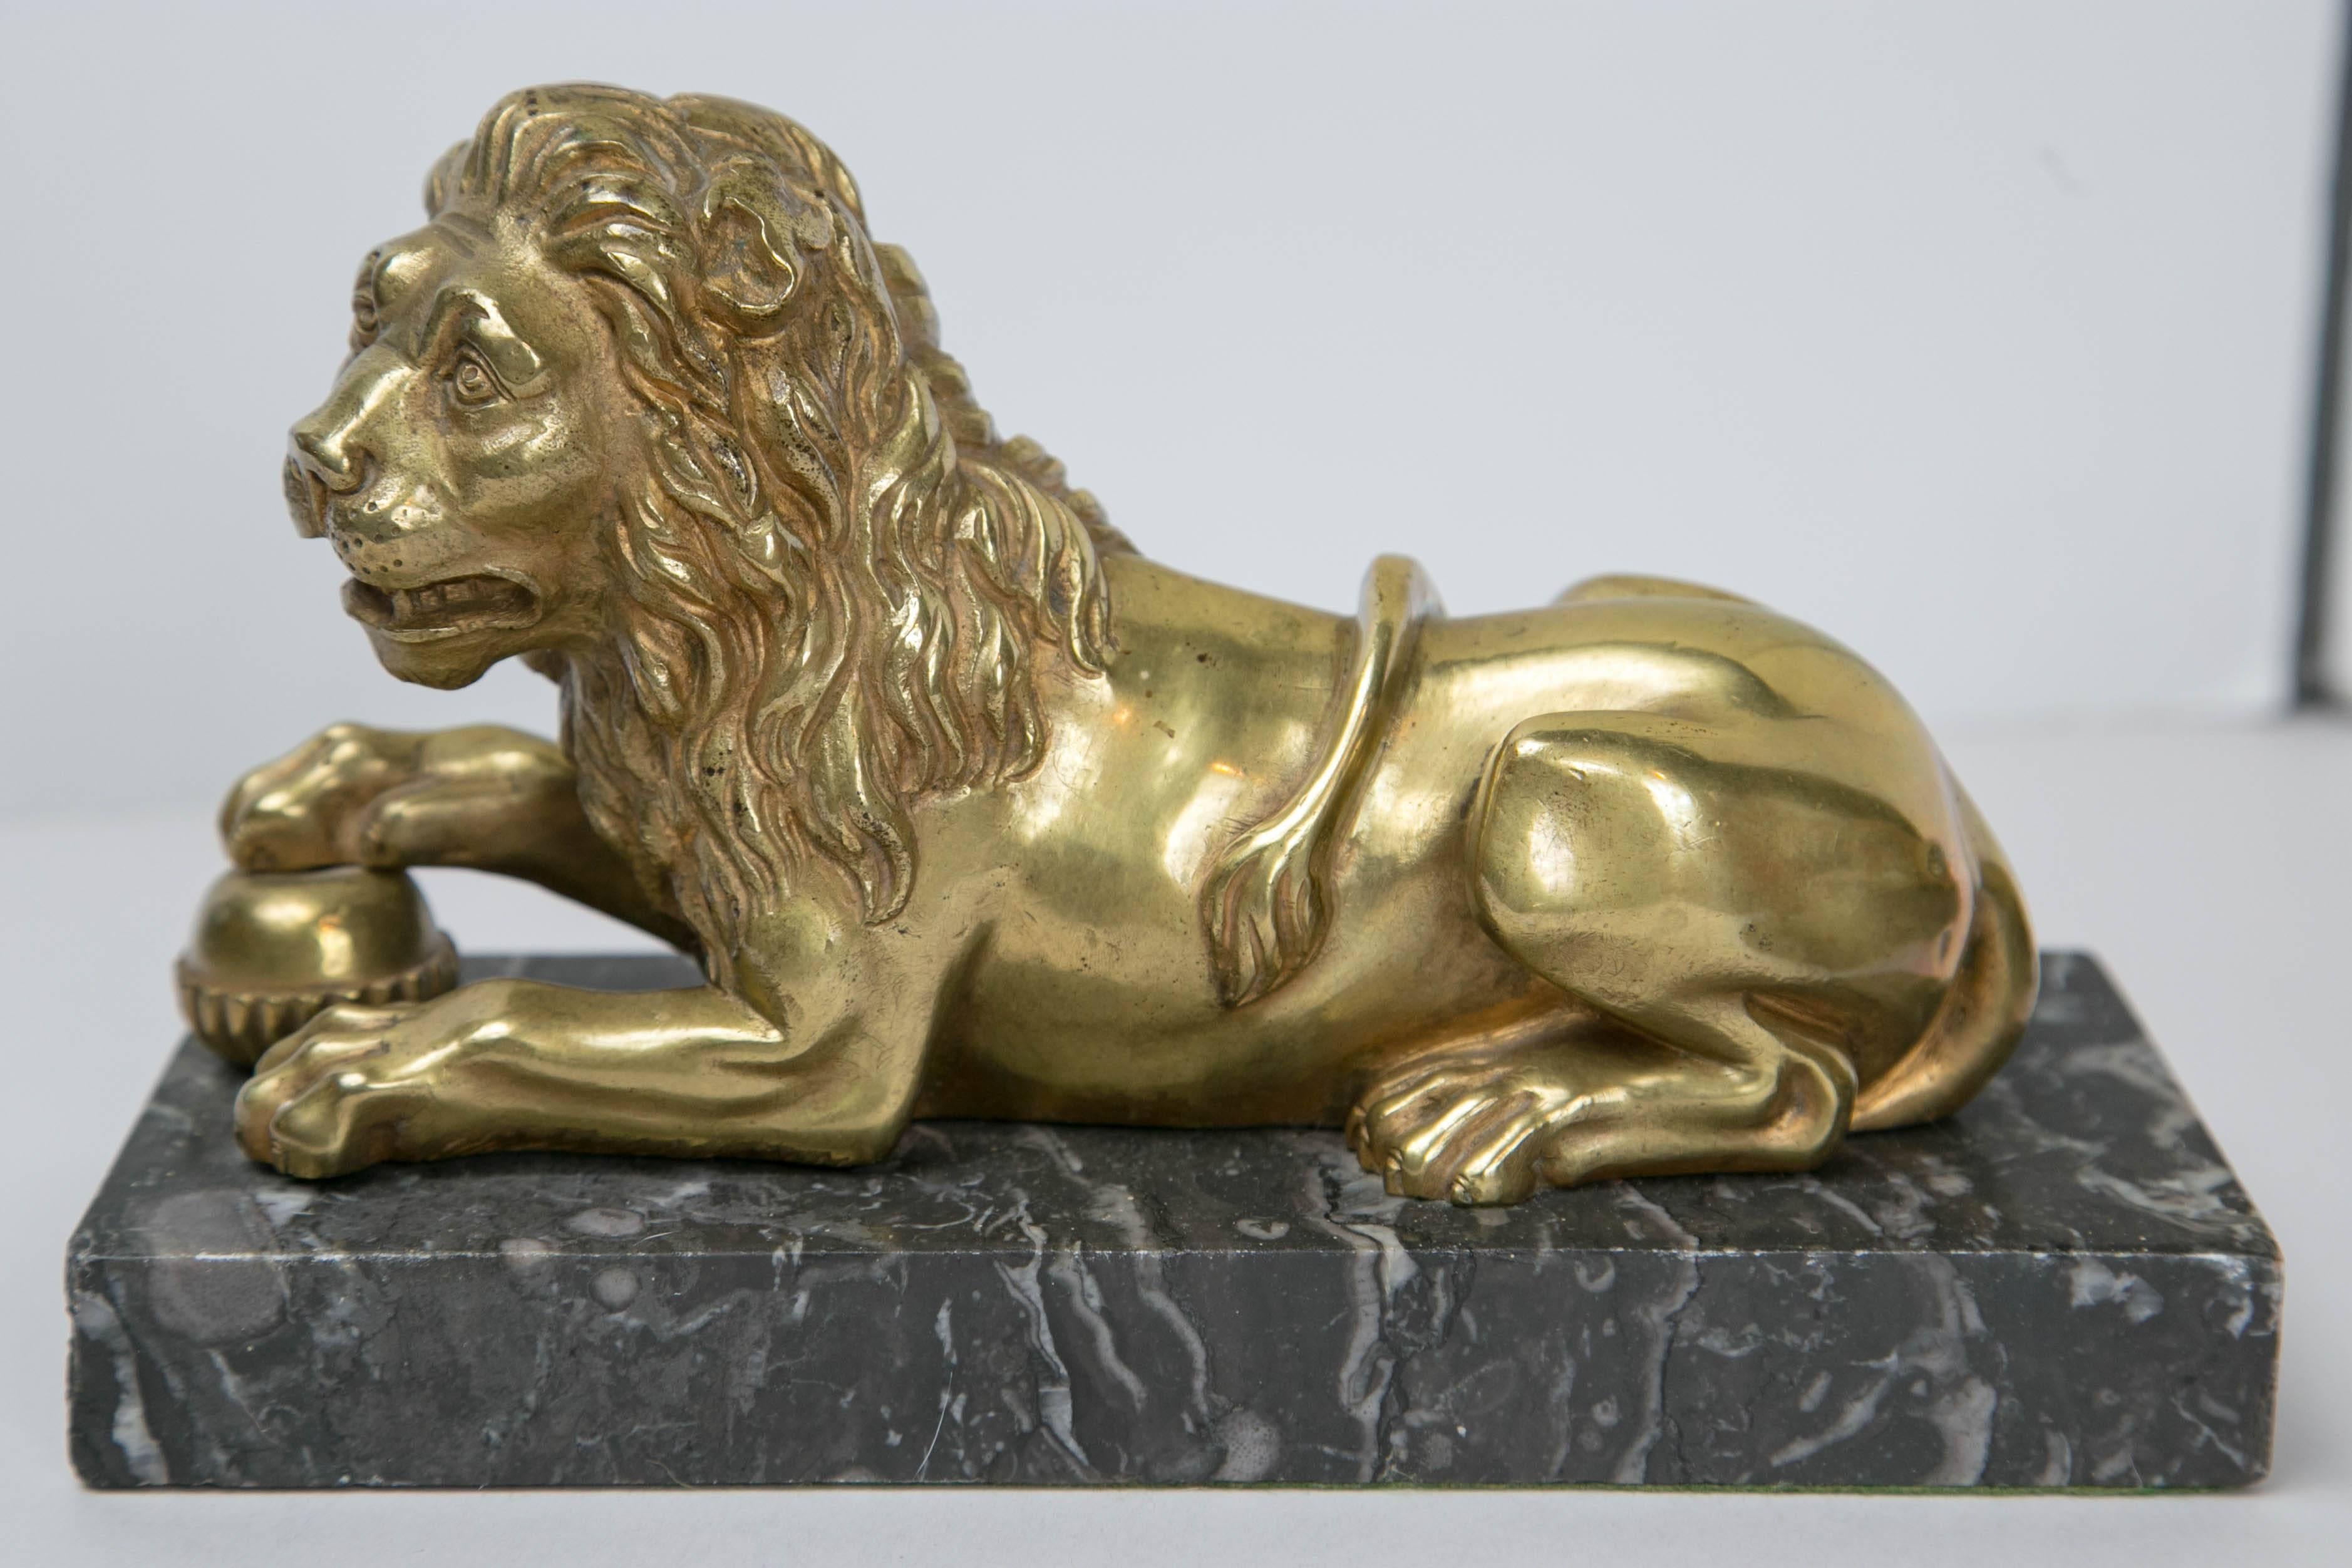 A rare pair of gilt bronze Medici lions resting on marble base. Each lion has a paw resting on a ball.